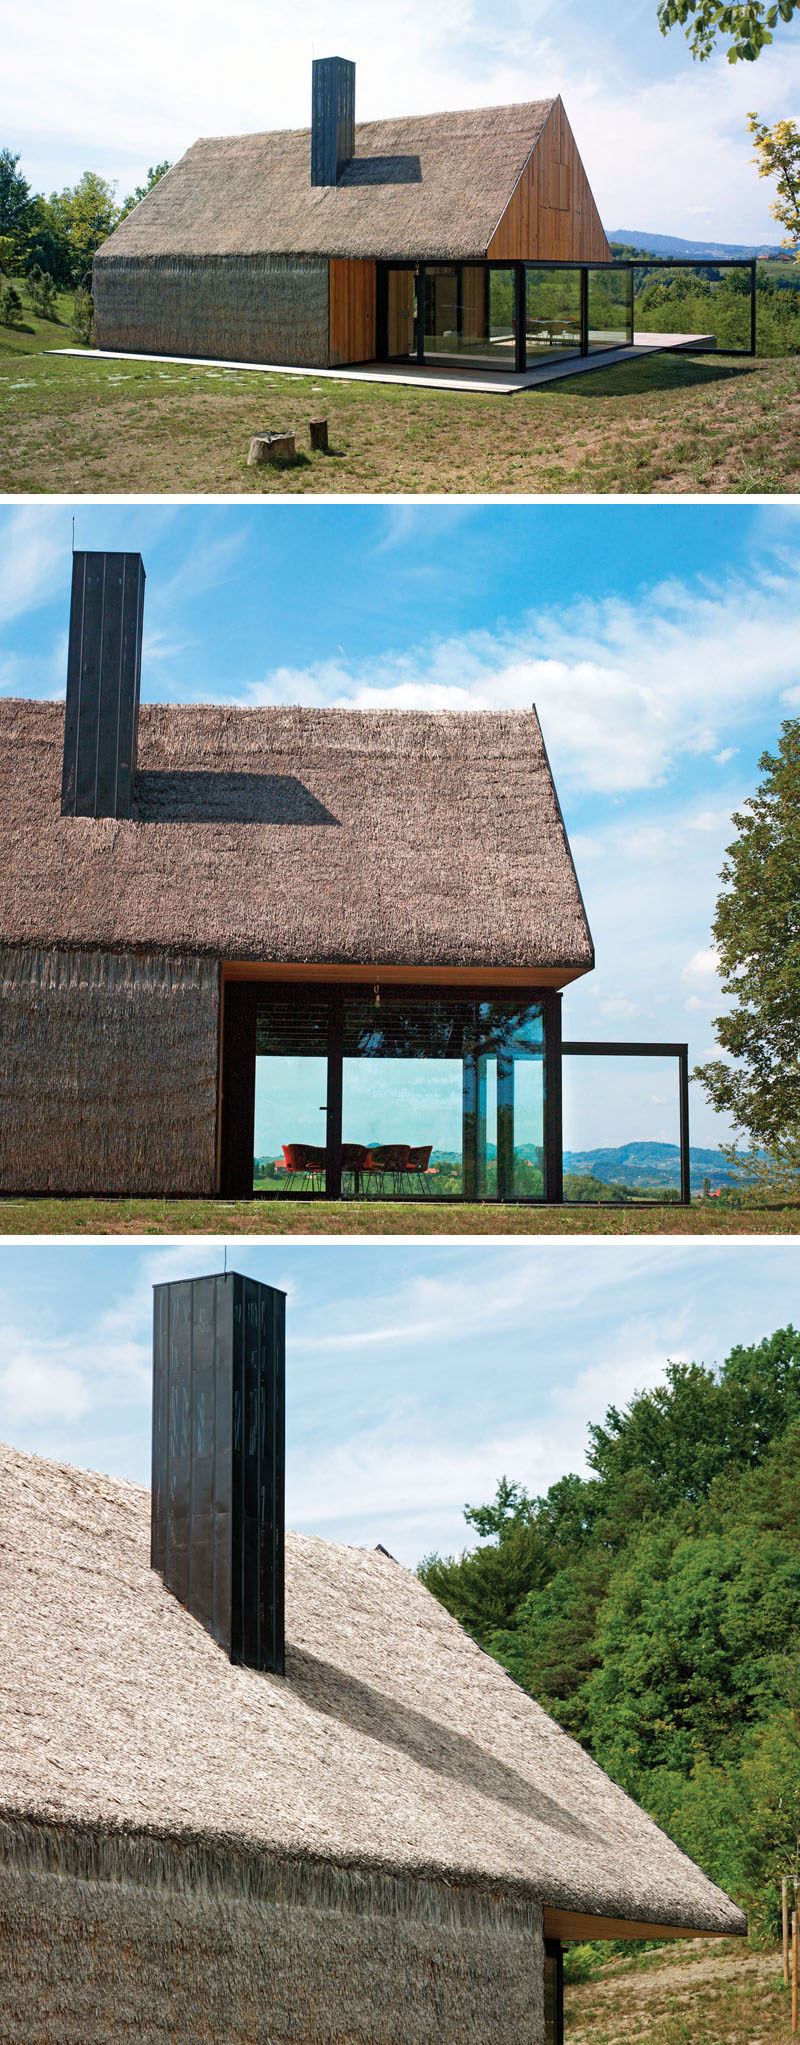 12 Examples Of Modern Houses And Buildings That Have A Thatched Roof // A dilapidated farmers cottage was restored and updated with modern timber cladding, and while the traditional straw walls and roof to pay tribute to the original structure and historical site.